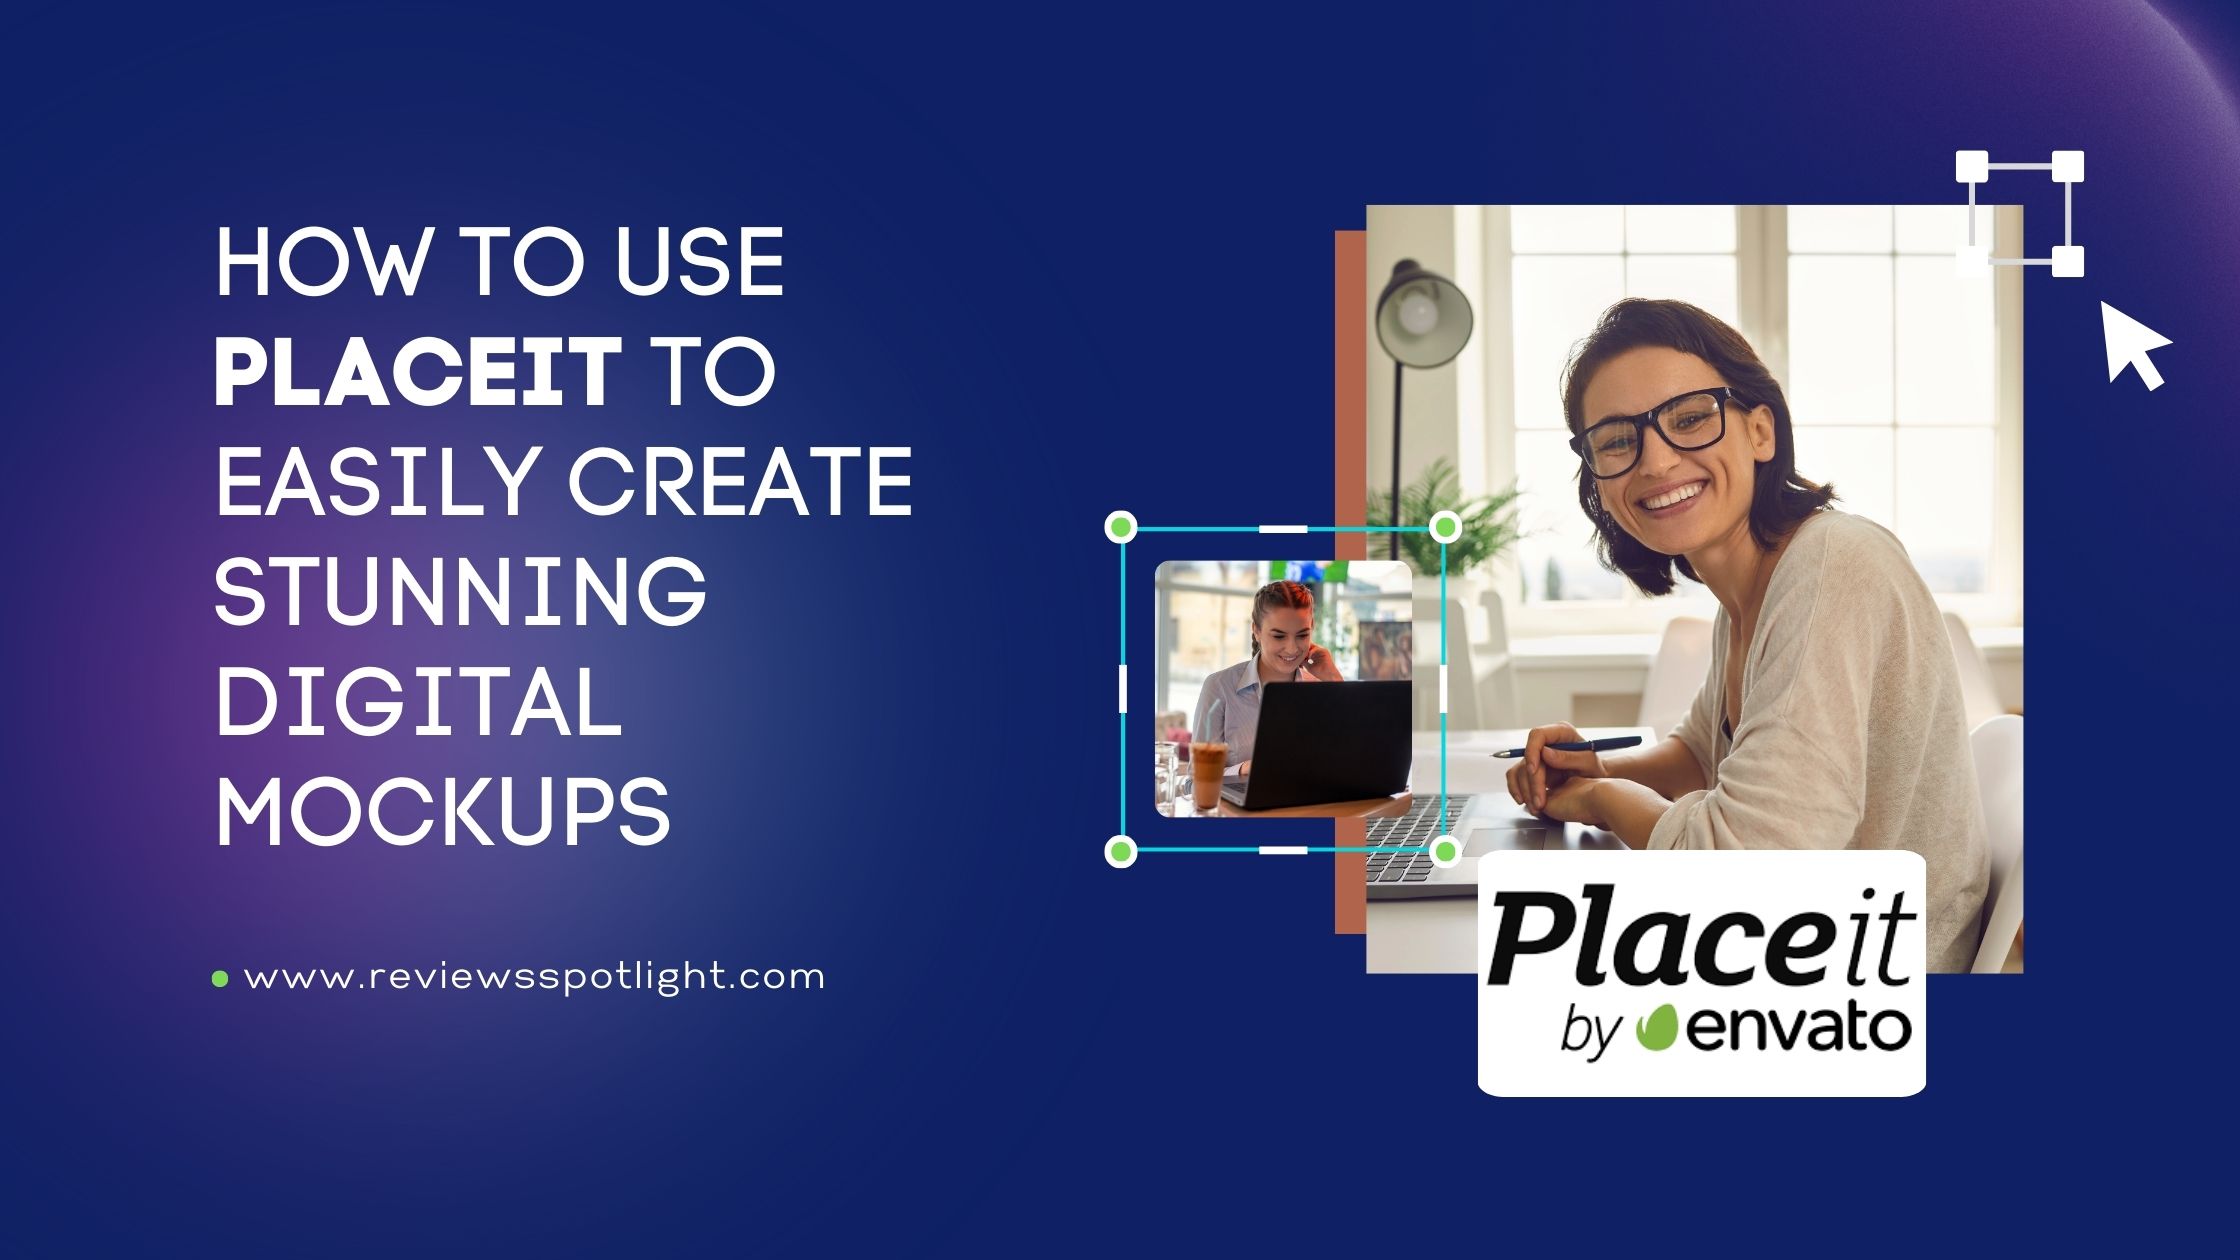 How to Use Placeit